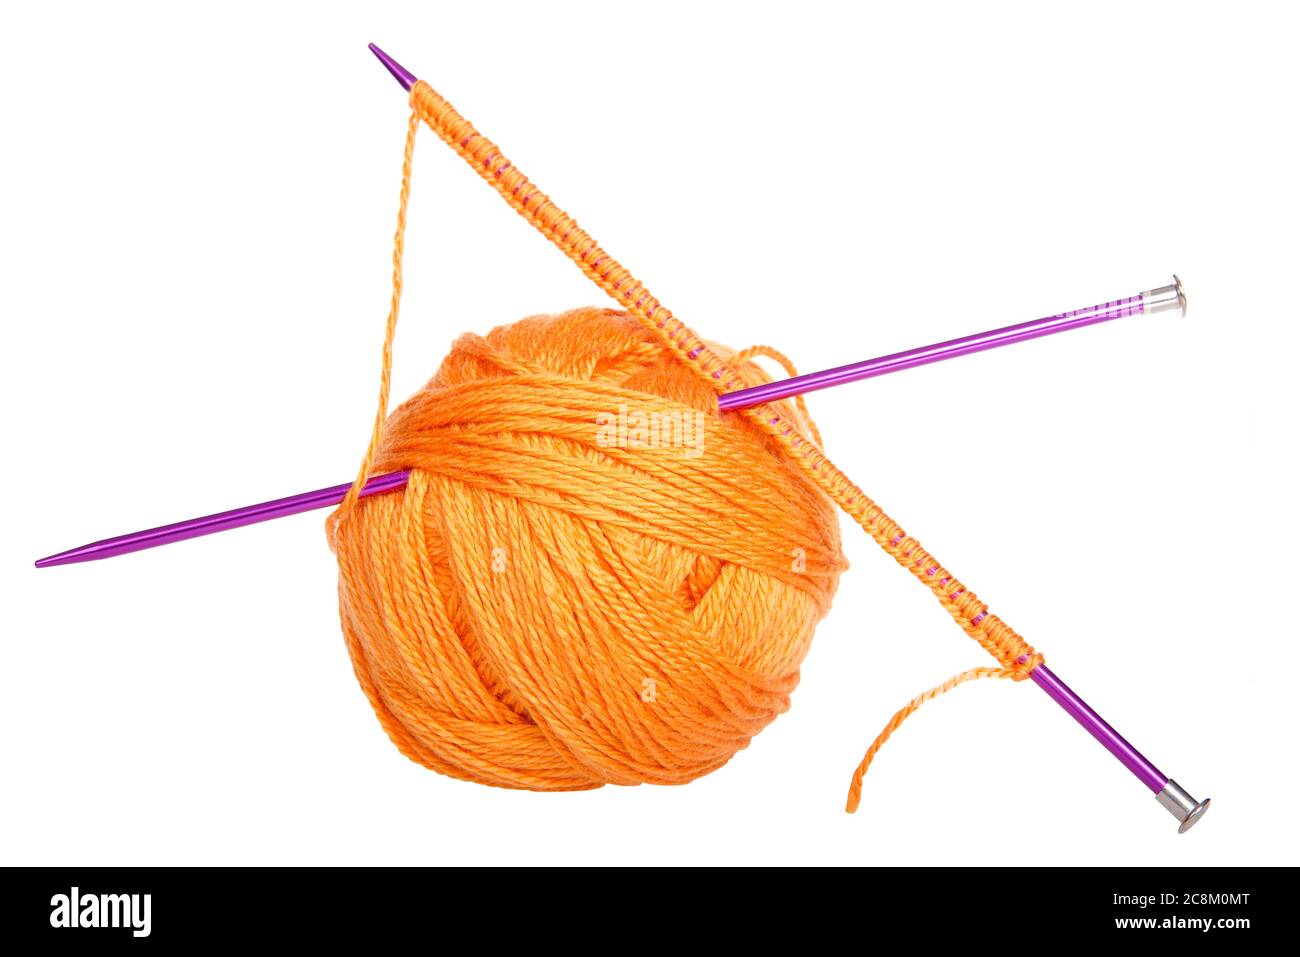 2,040 Large Knitting Needles Images, Stock Photos, 3D objects